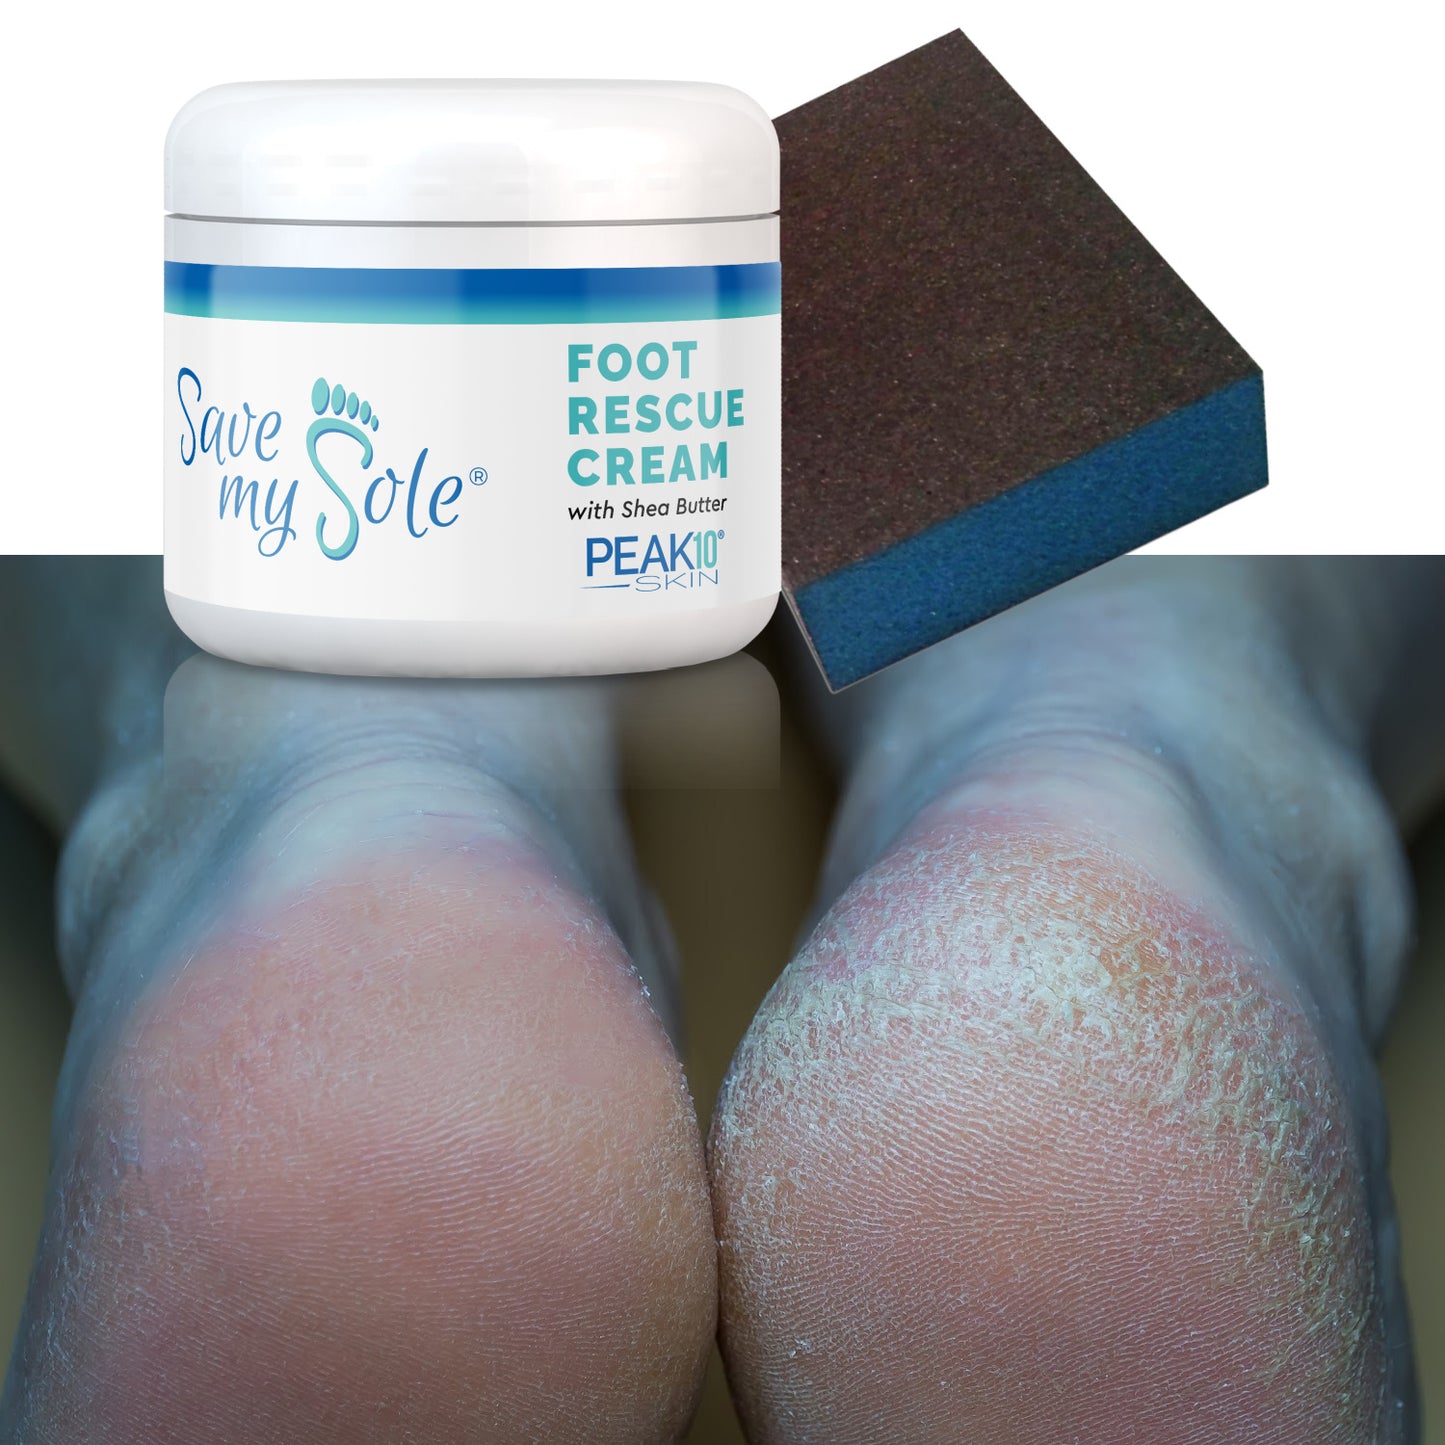 SAVE MY SOLE® foot rescue cream 4.2 oz w/Exfoliating Smoothing Block